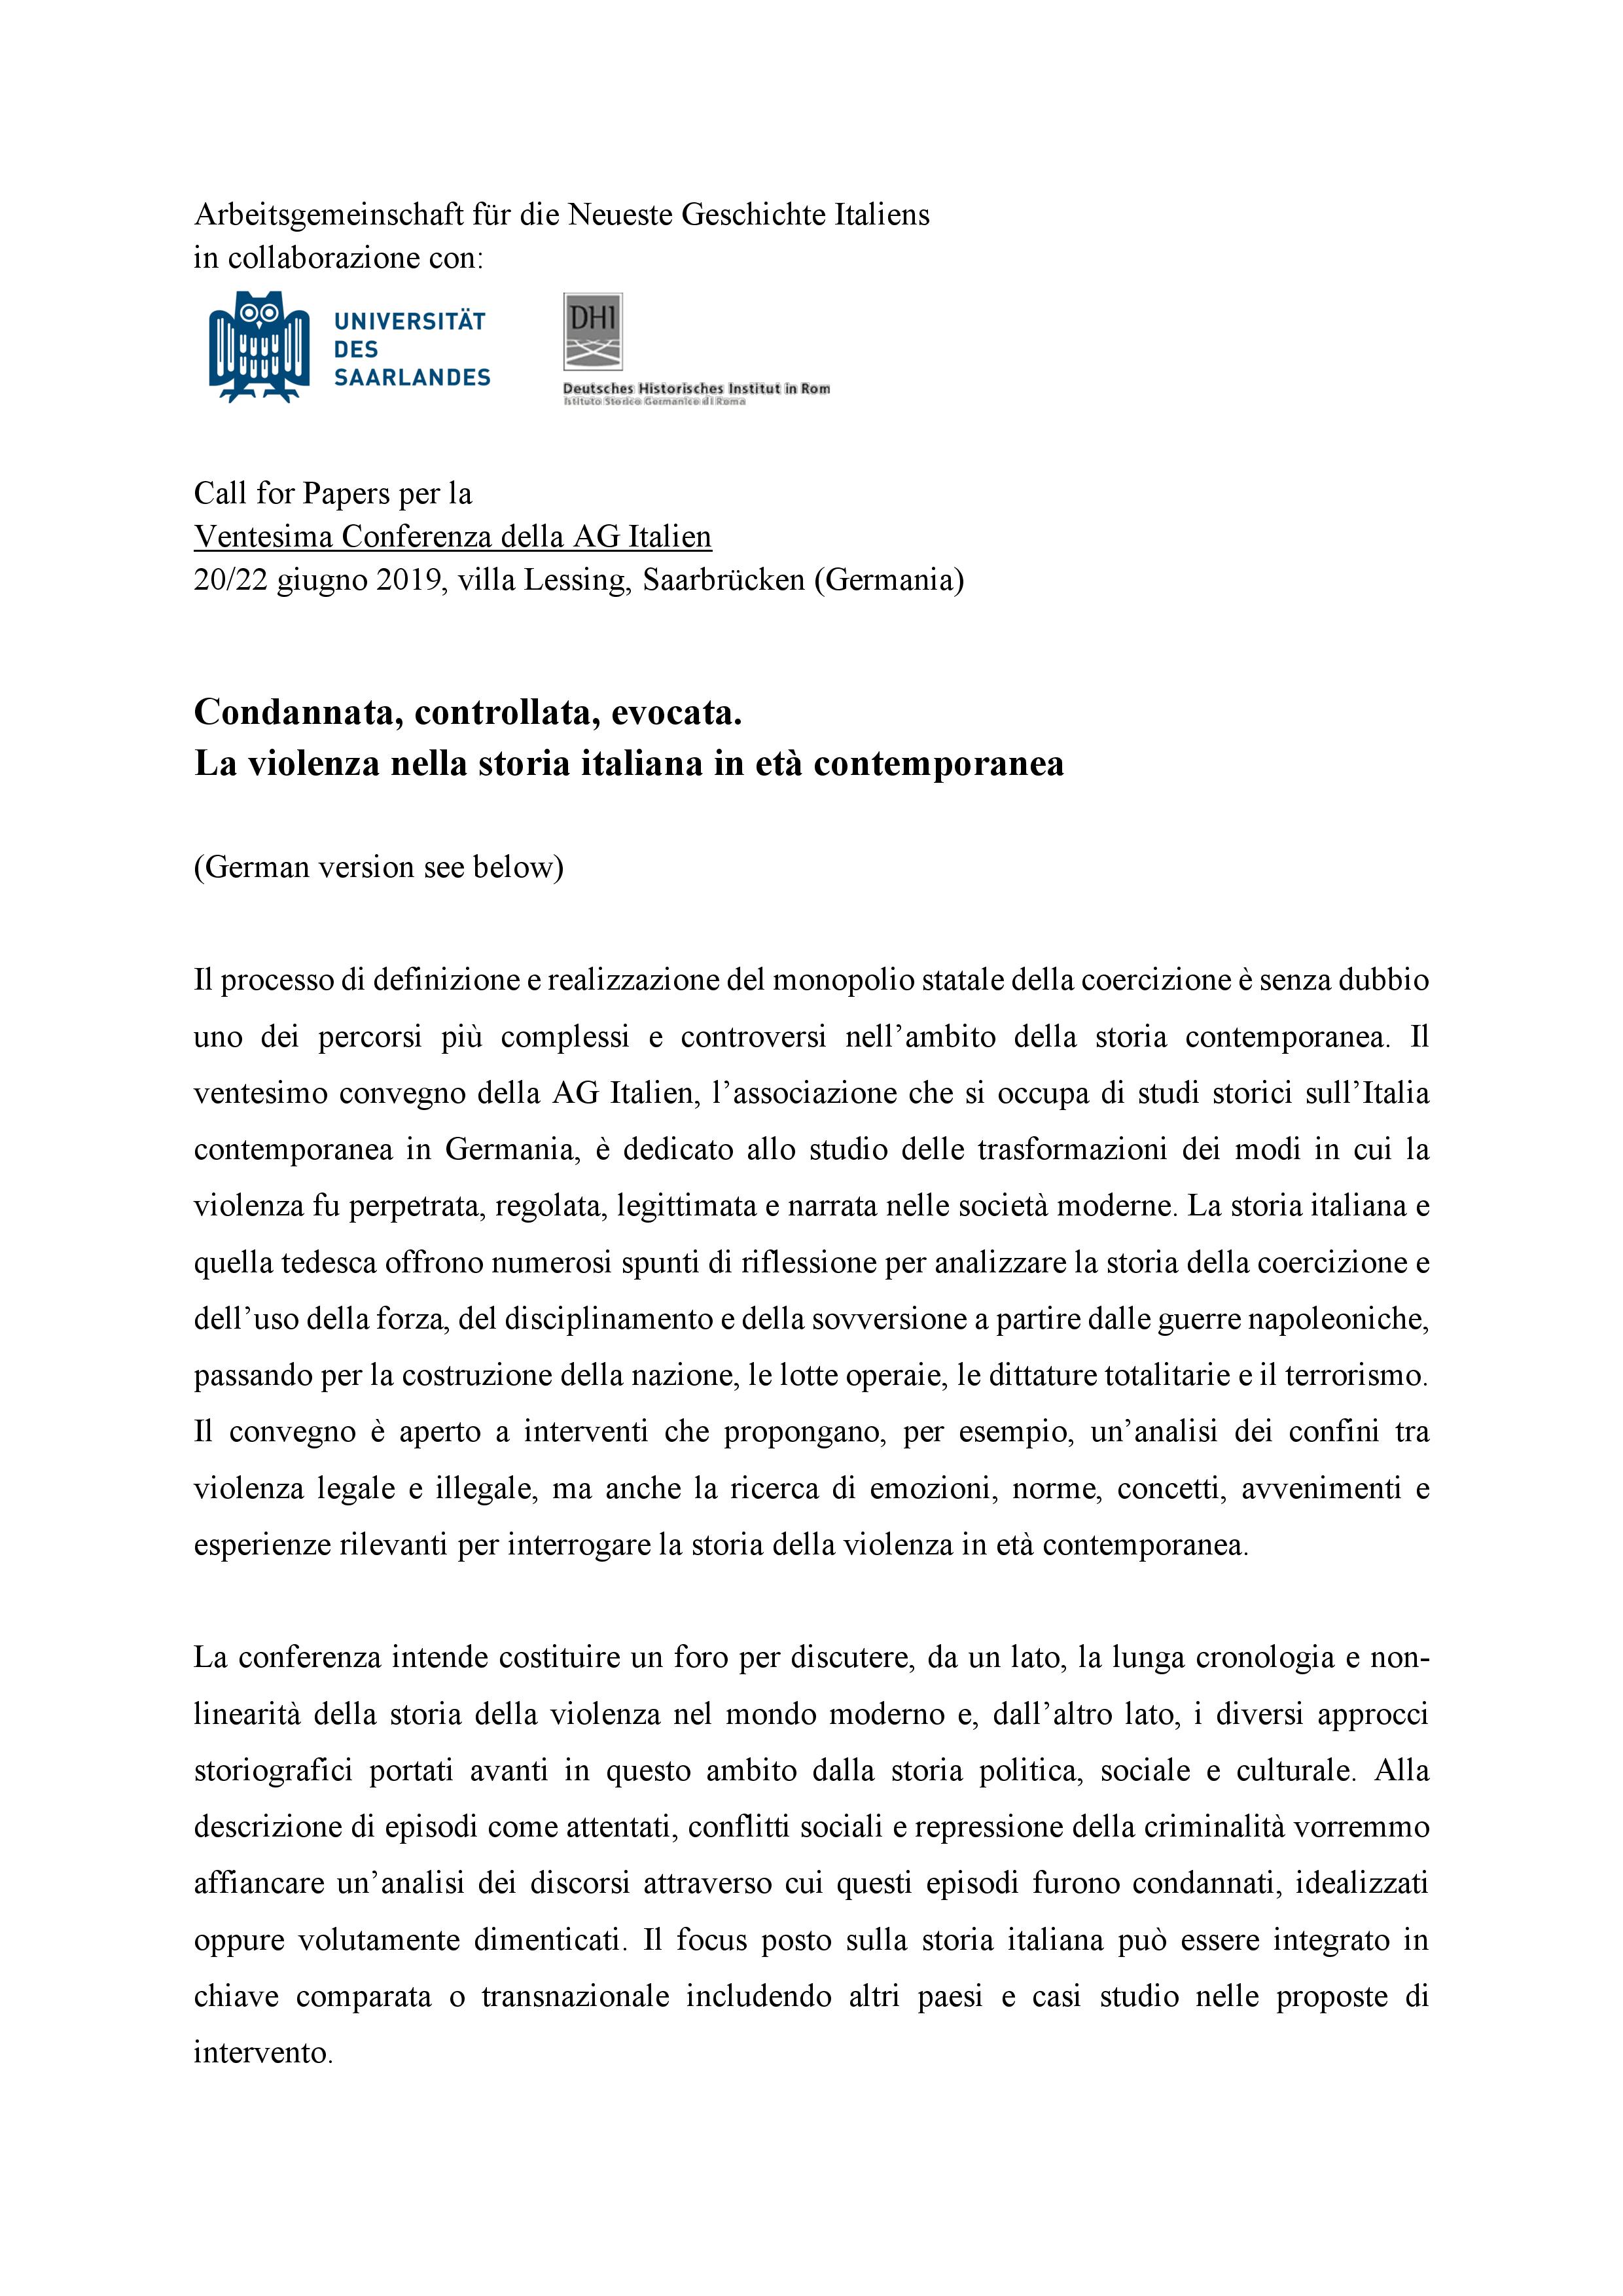 CfP Conferenza AG Italien 2019-page-001